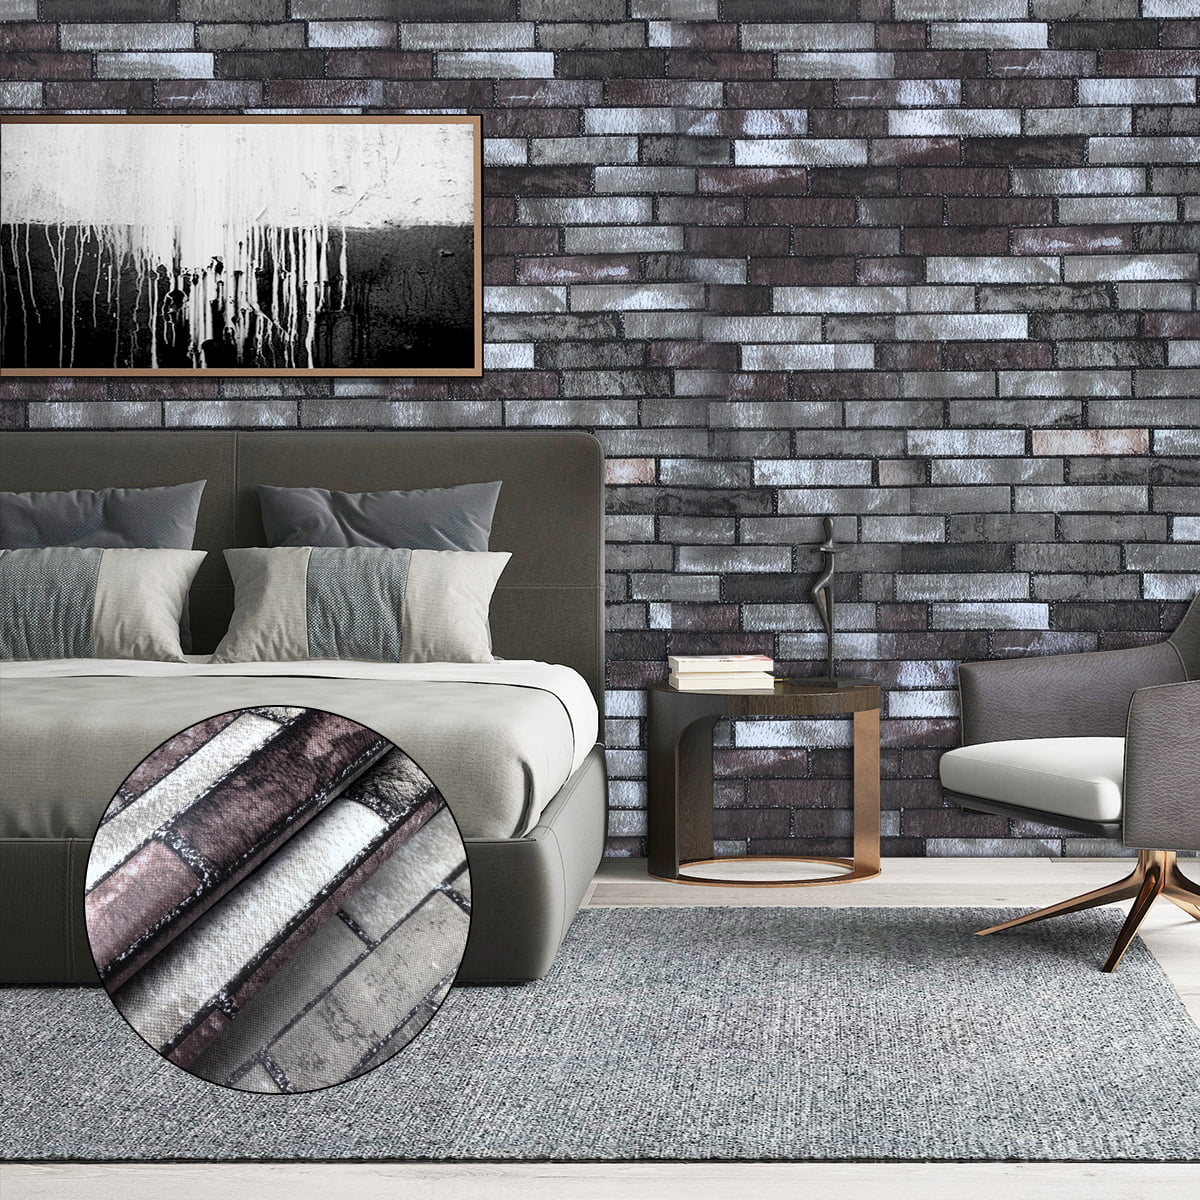 Coavas Brick Wallpaper Peel and Stick White 11.8x78.7 Inches for Bedroom Kitchen Stick on Wallpaper Self-Adhesive Faux Brick Decorative Printed Classroom Dorm Accent Wall 30x200cm 